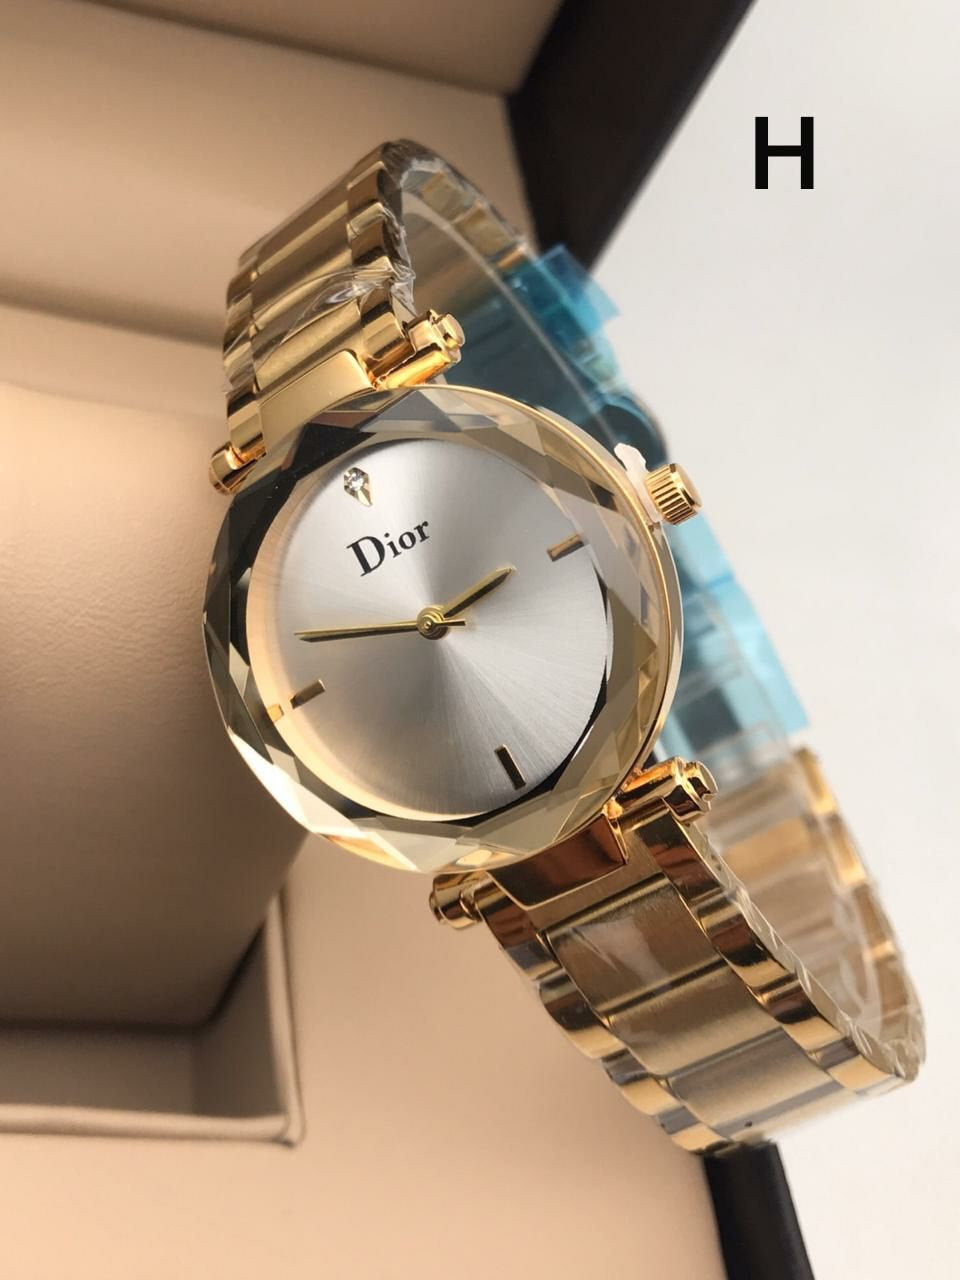 Dior Women's Watch With White Dial Gold Bezel Metal Chain